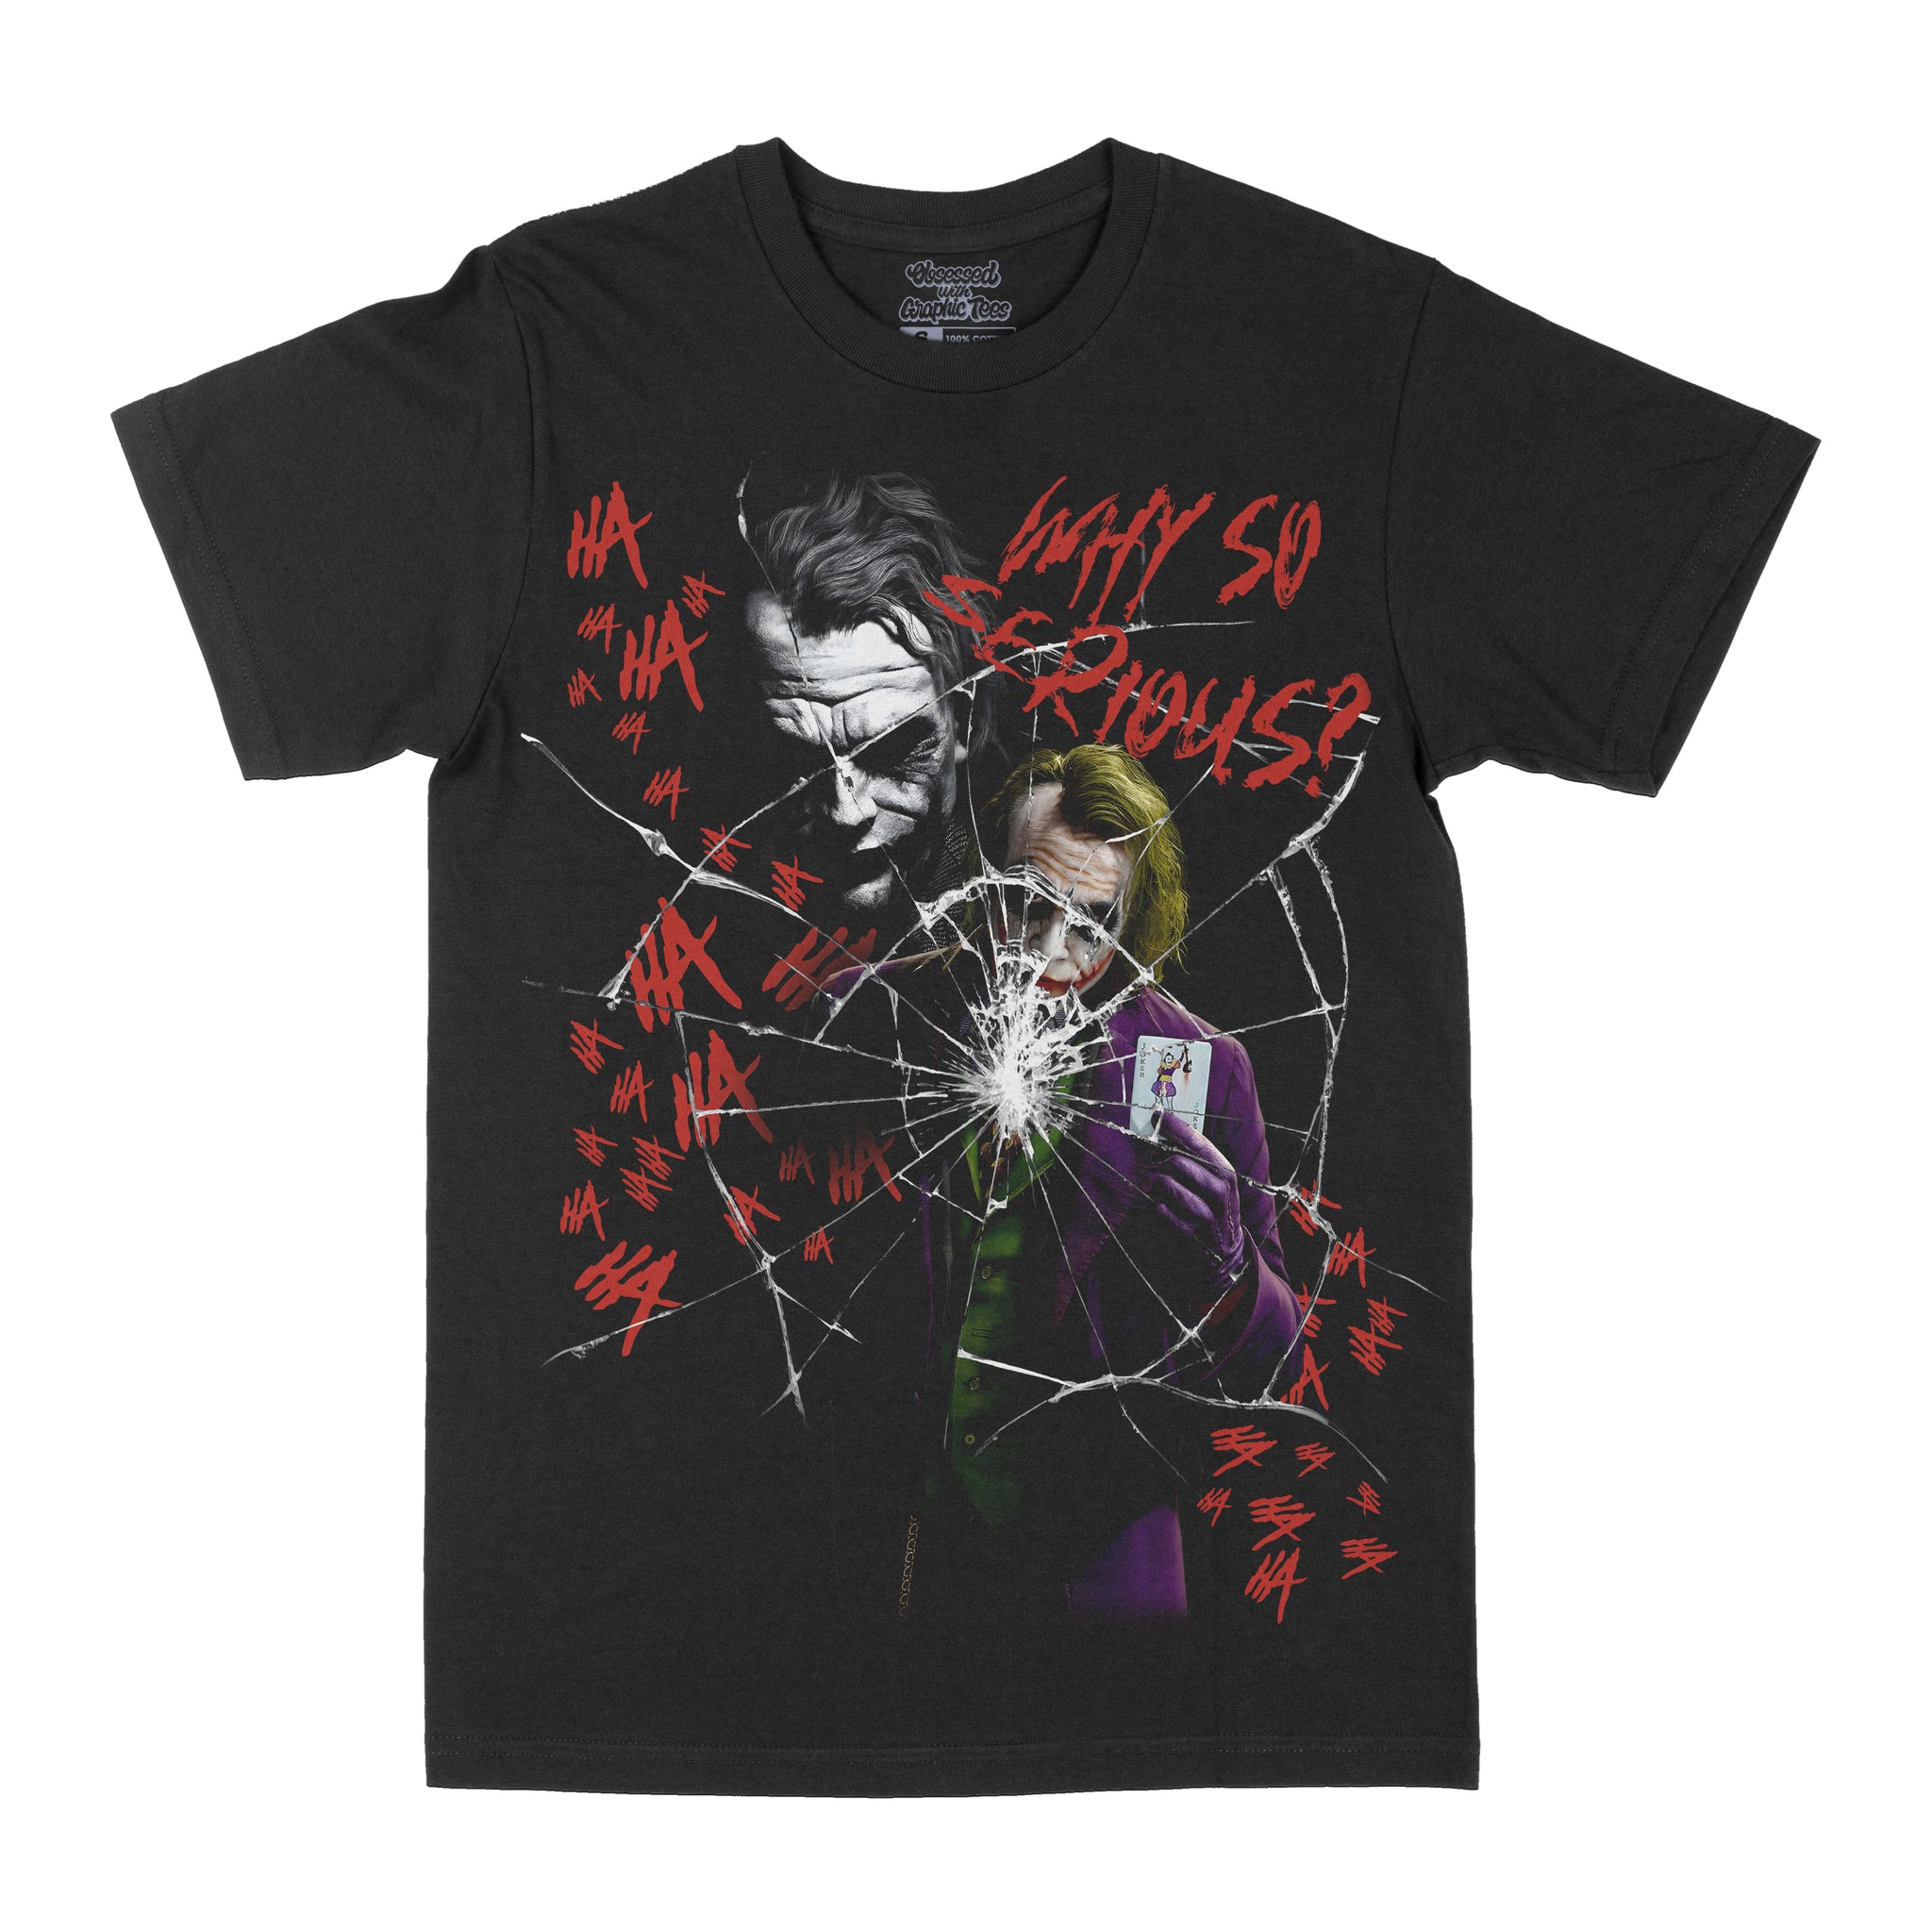 Joker "Why So Serious" Graphic Tee